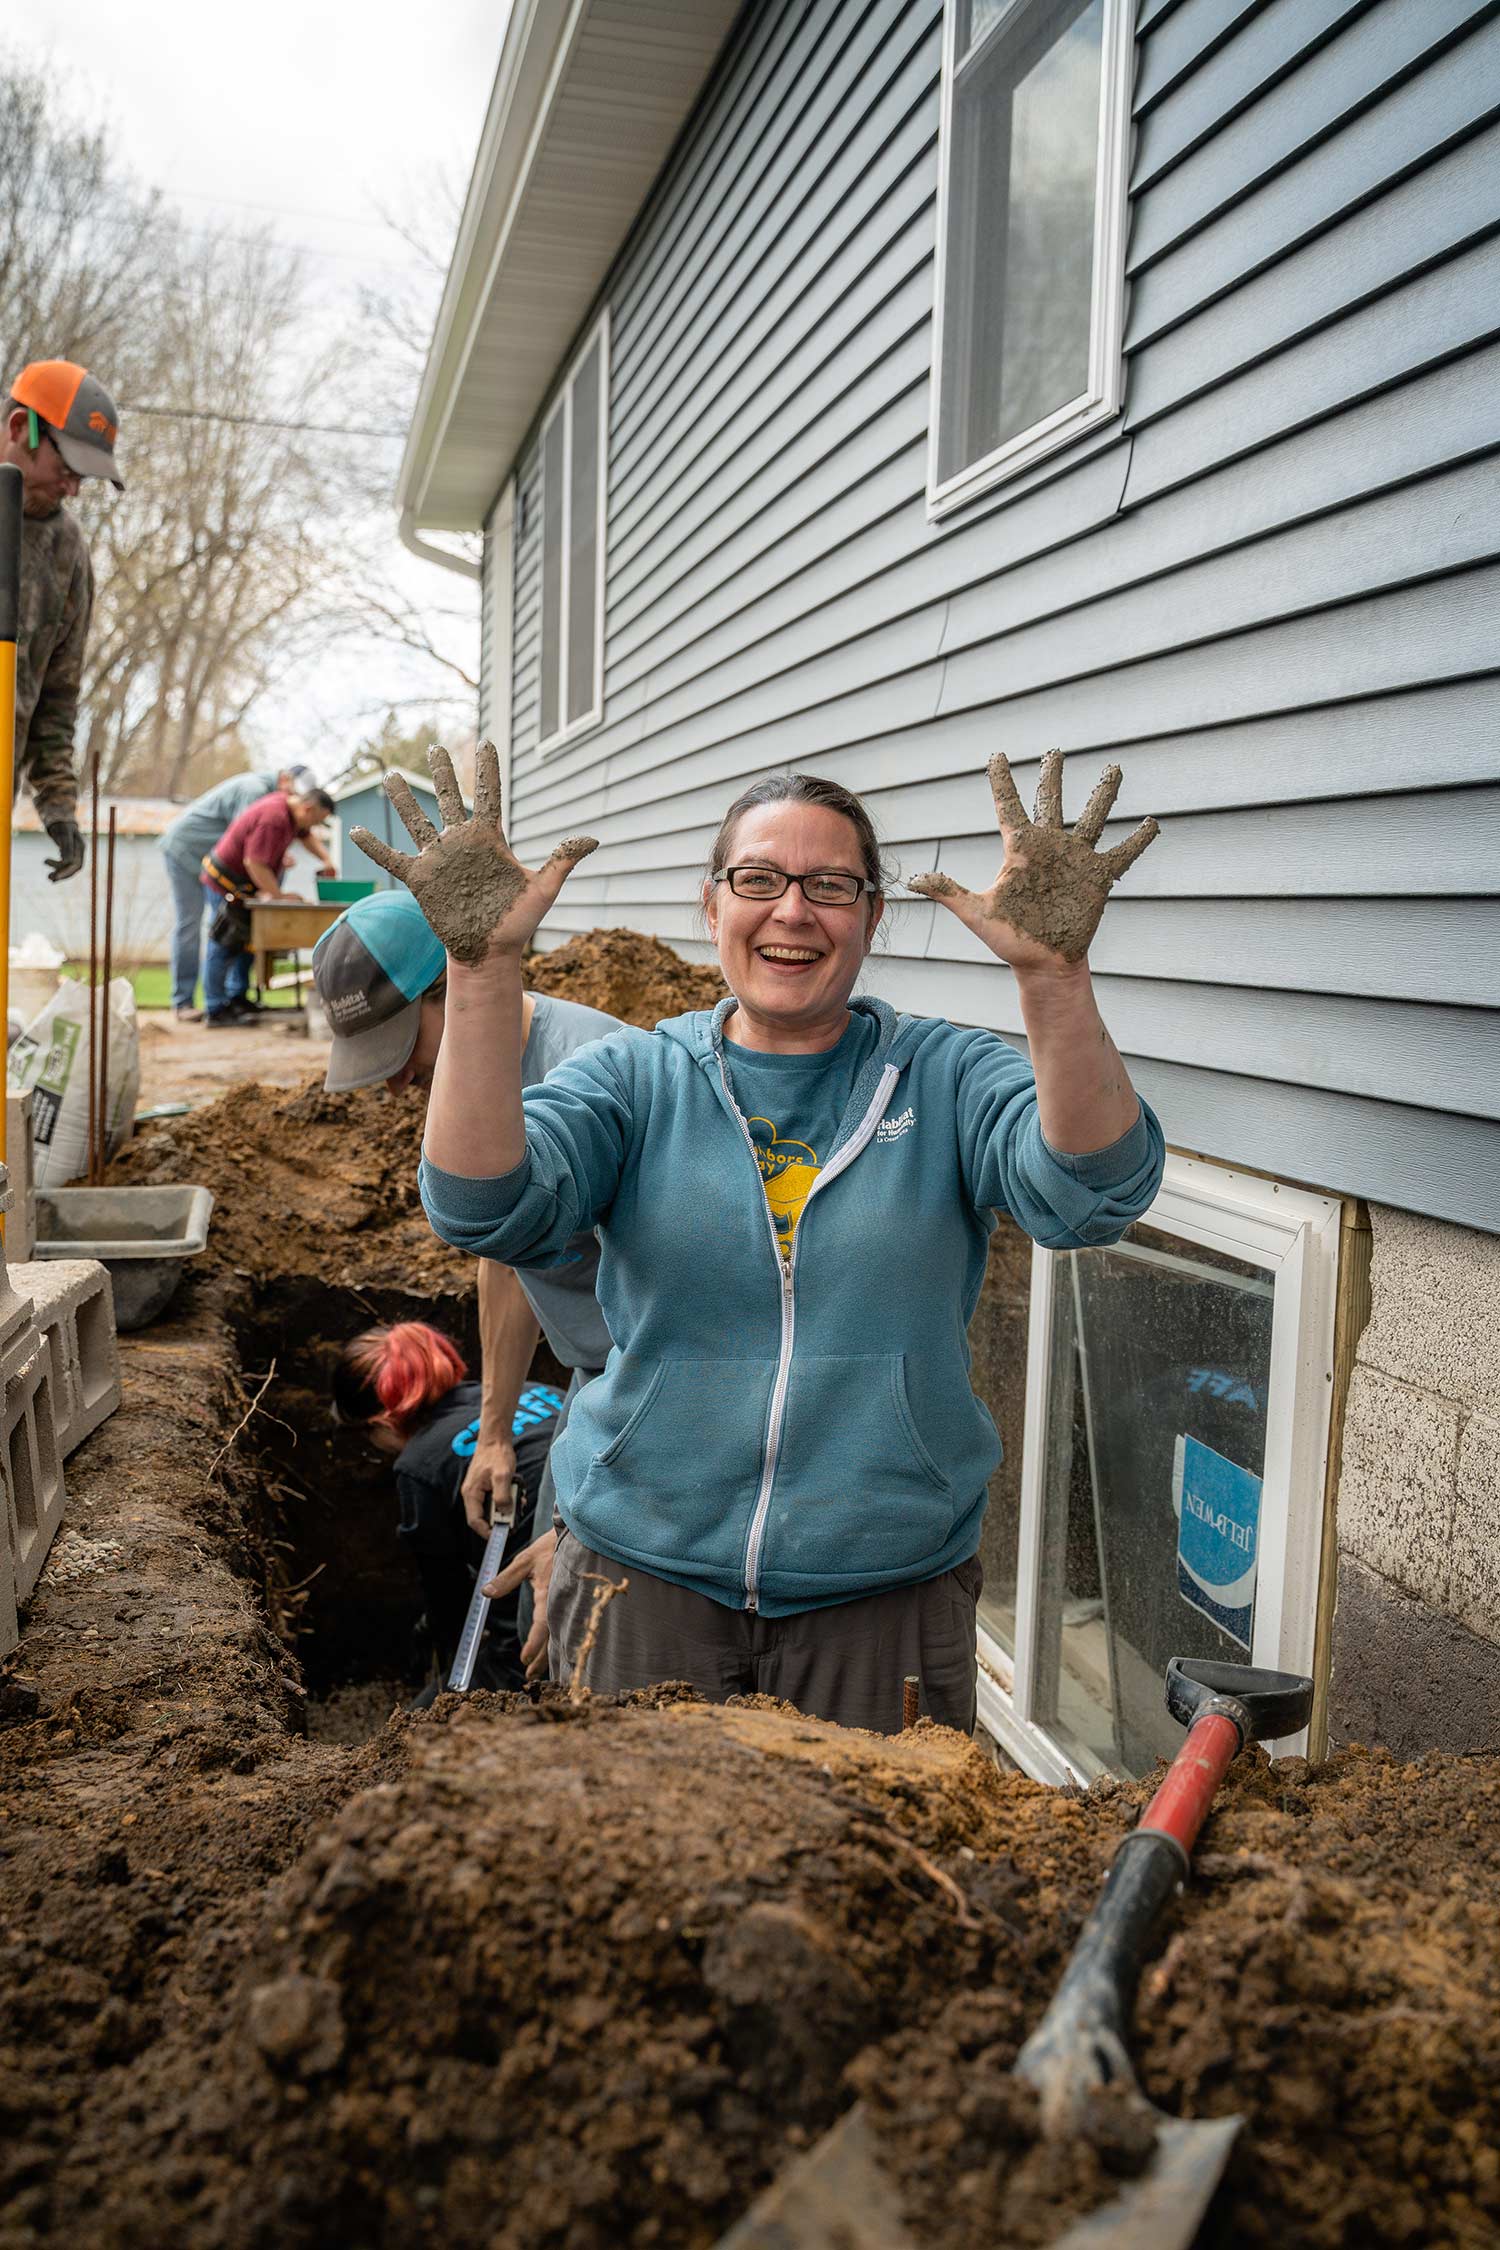 volunteer in dug hole laughing while showing dirt on hands